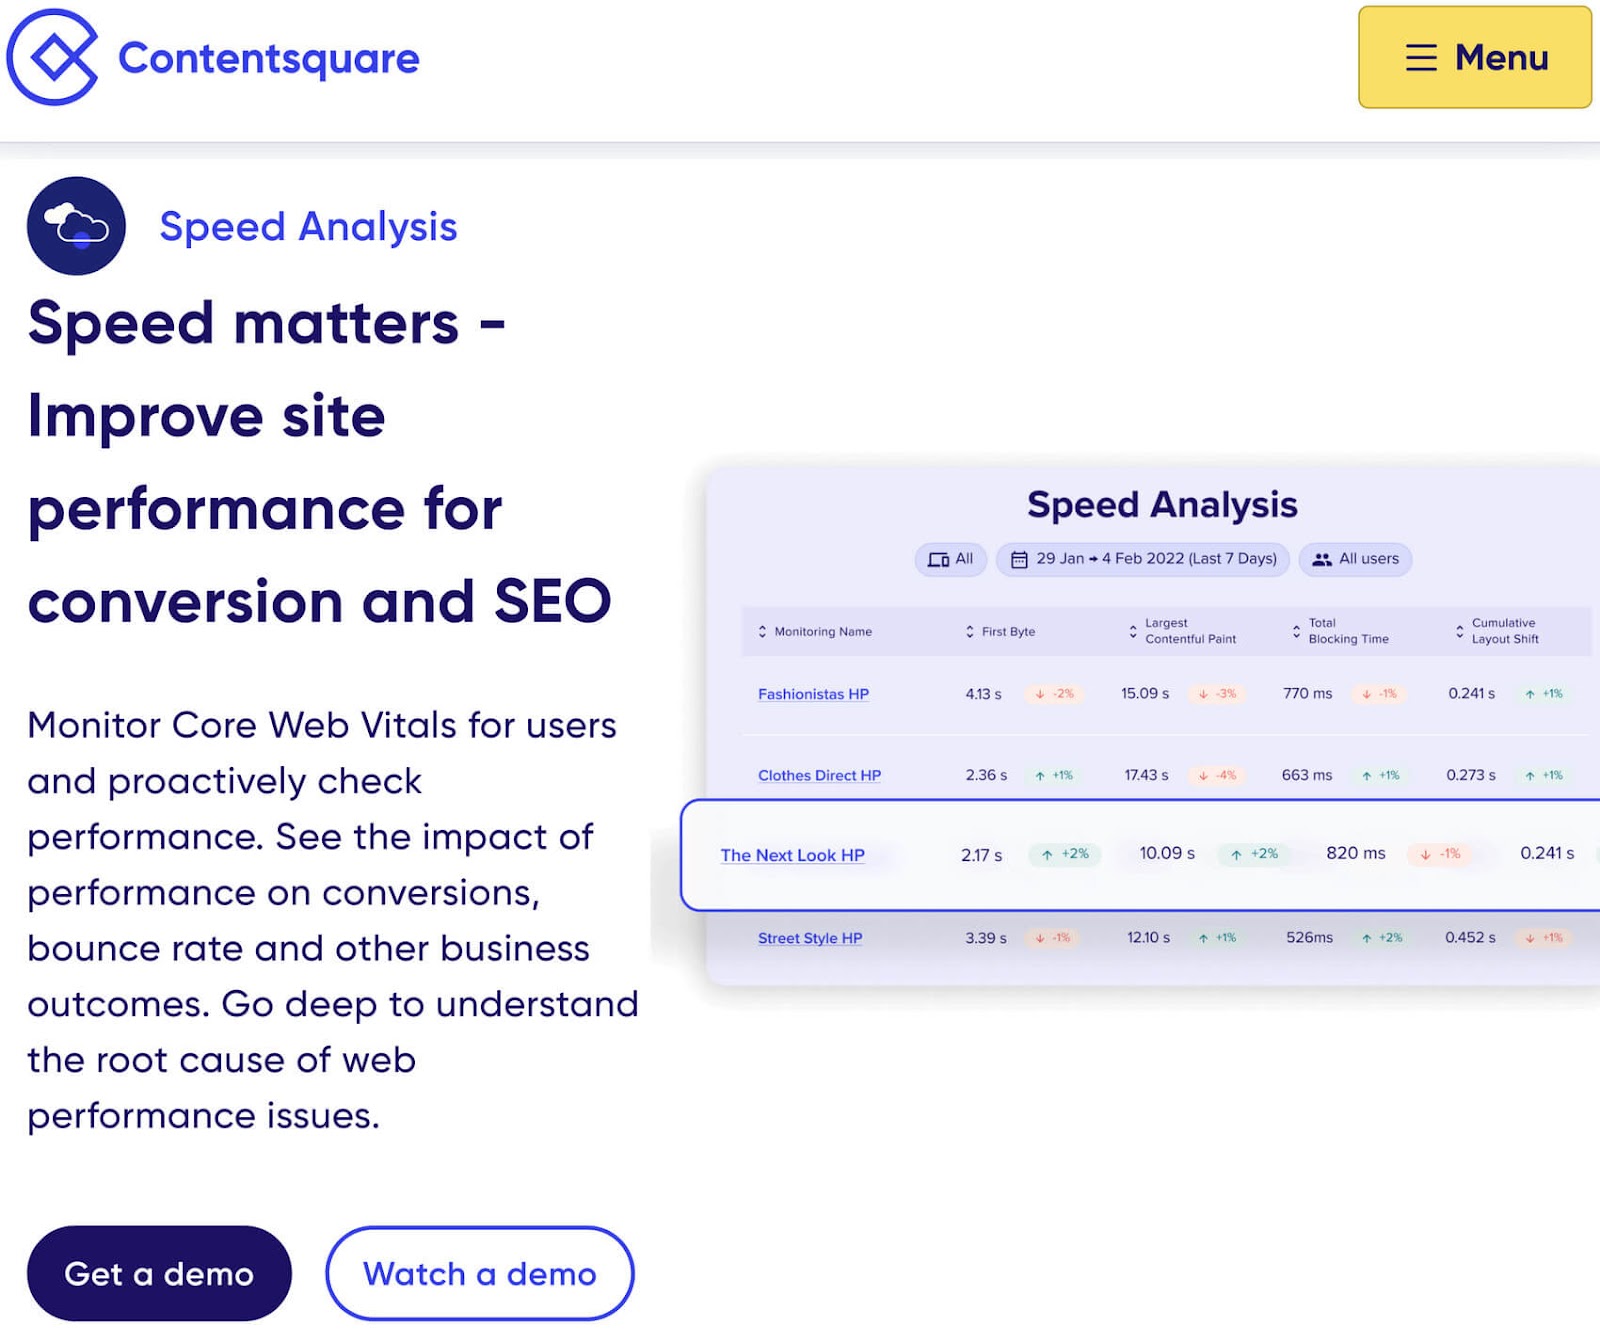 Contentsquare's Speed Analysis instrumentality   leafage   with show  metrics for antithetic  websites and options to get   oregon  ticker  a demo.